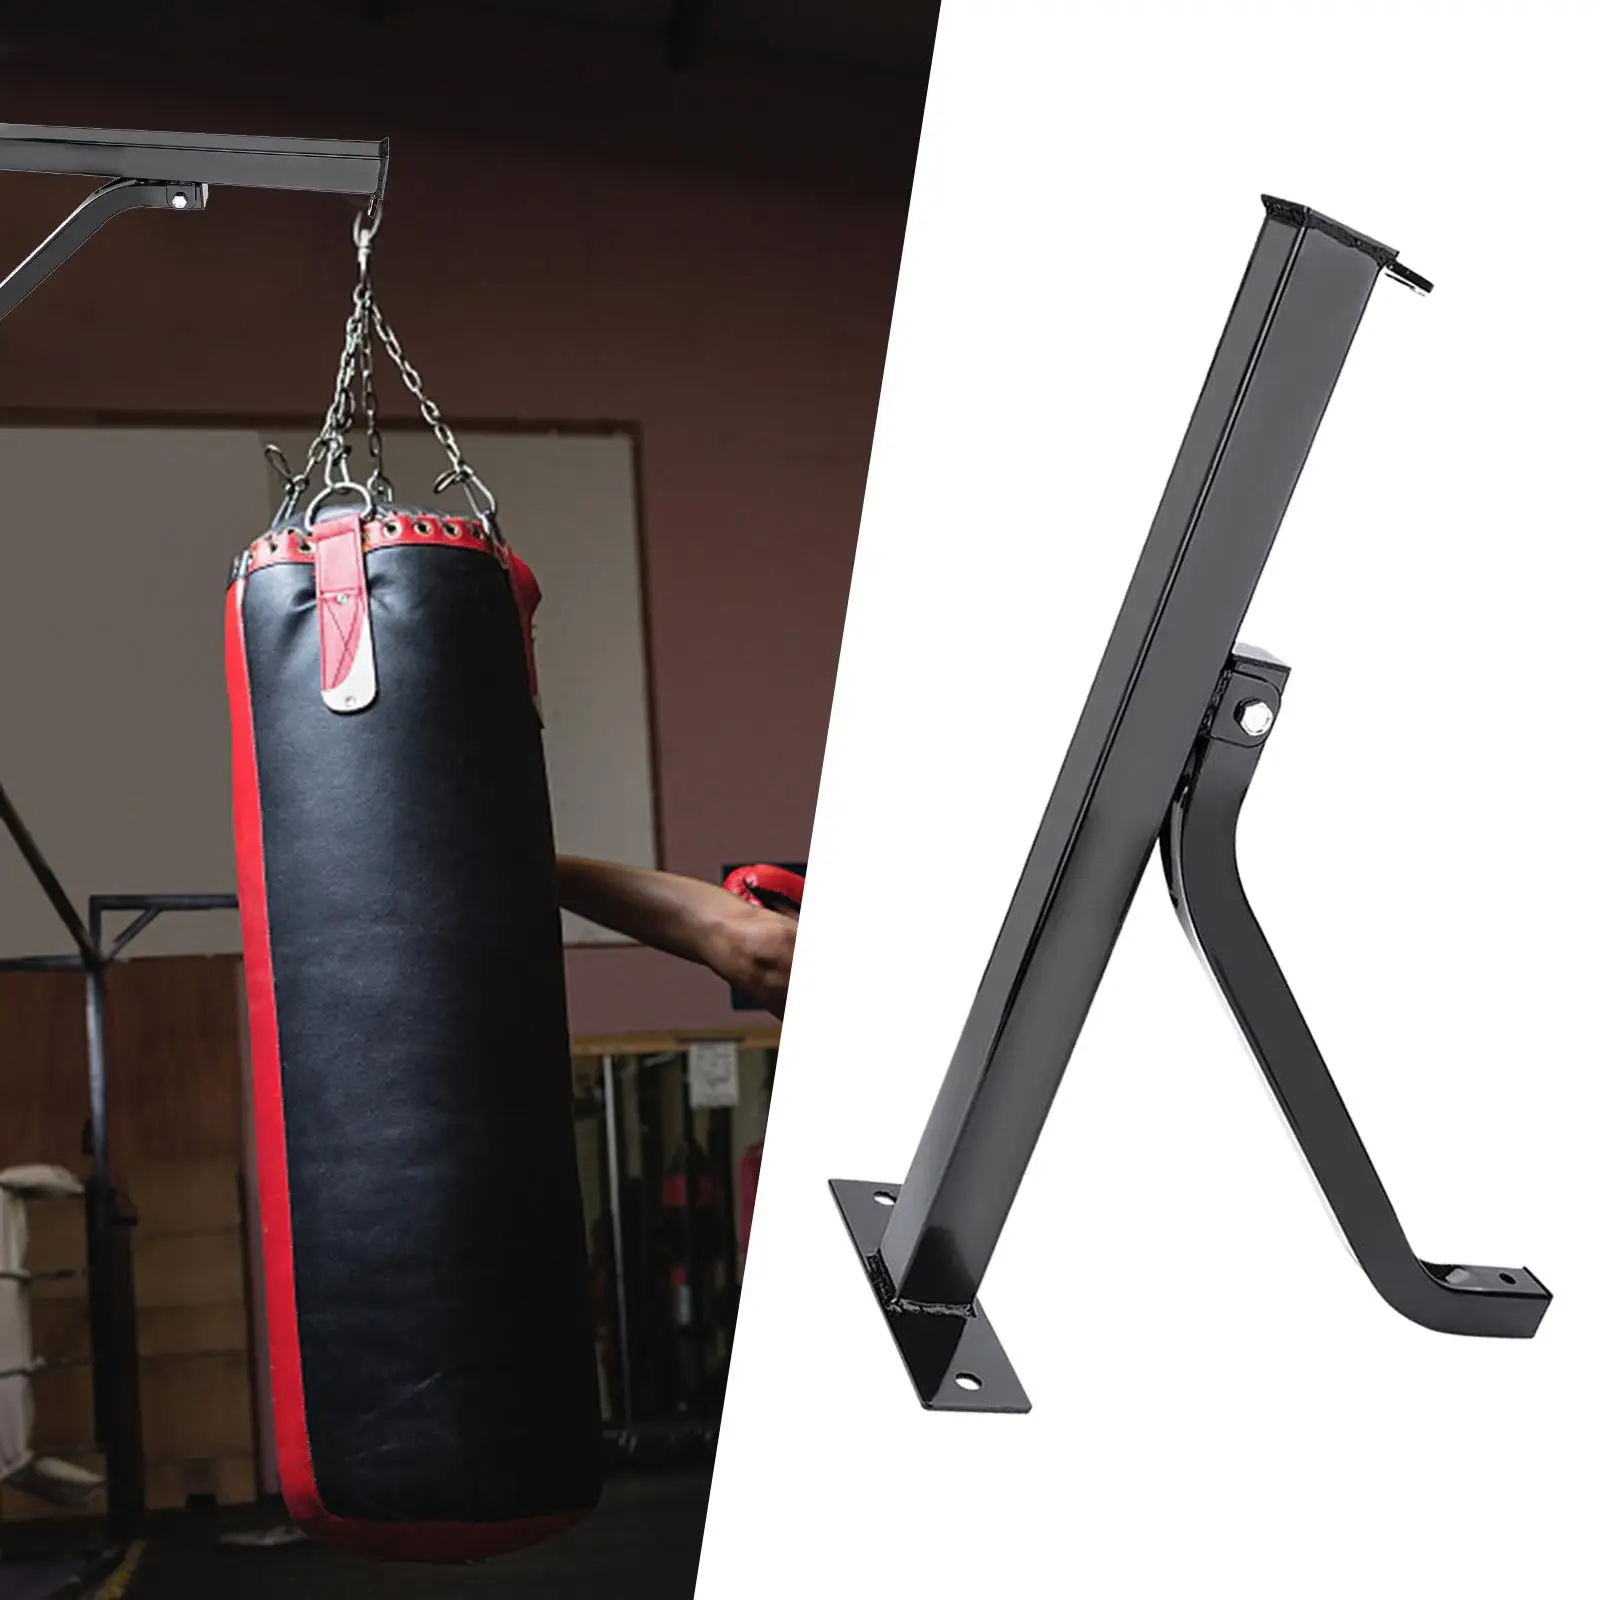 Wall Mount Heavy Bag Hanger Punching Bag Wall Bracket Hanging Training Holder for Gym Kick Boxing Home Muay Thai Accessories